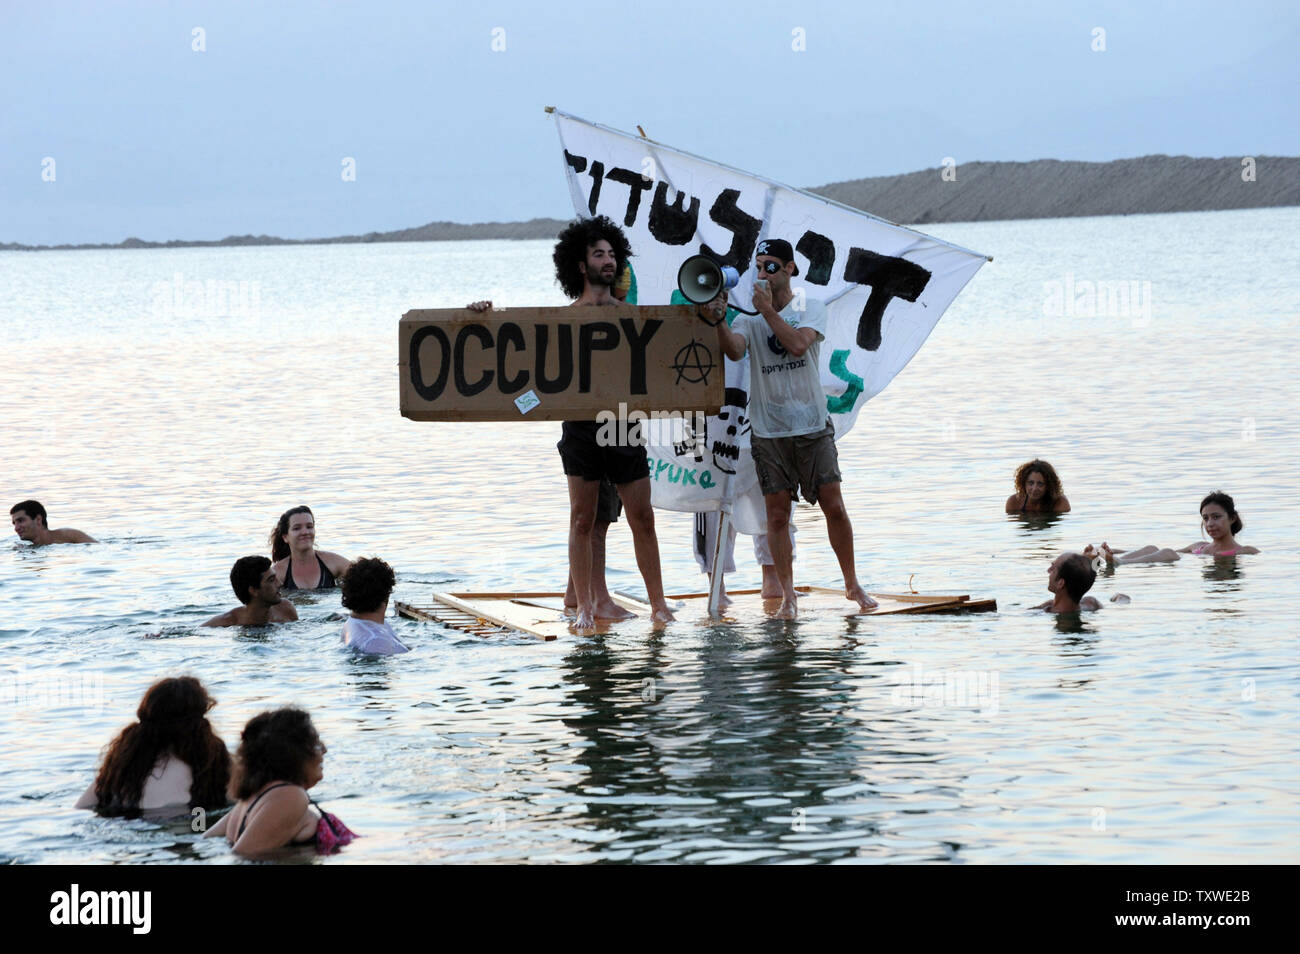 Israeli and international environmental and social activists float on a make-shift pirate ship in the Dead Sea, during a protest float, at dawn, against the deterioration of the Dead Sea, in an event organized by U.S. photographer Spencer Tunick, not seen, at Ein Bokek, Israel, September 14, 2012. UPI/Debbie Hill Stock Photo